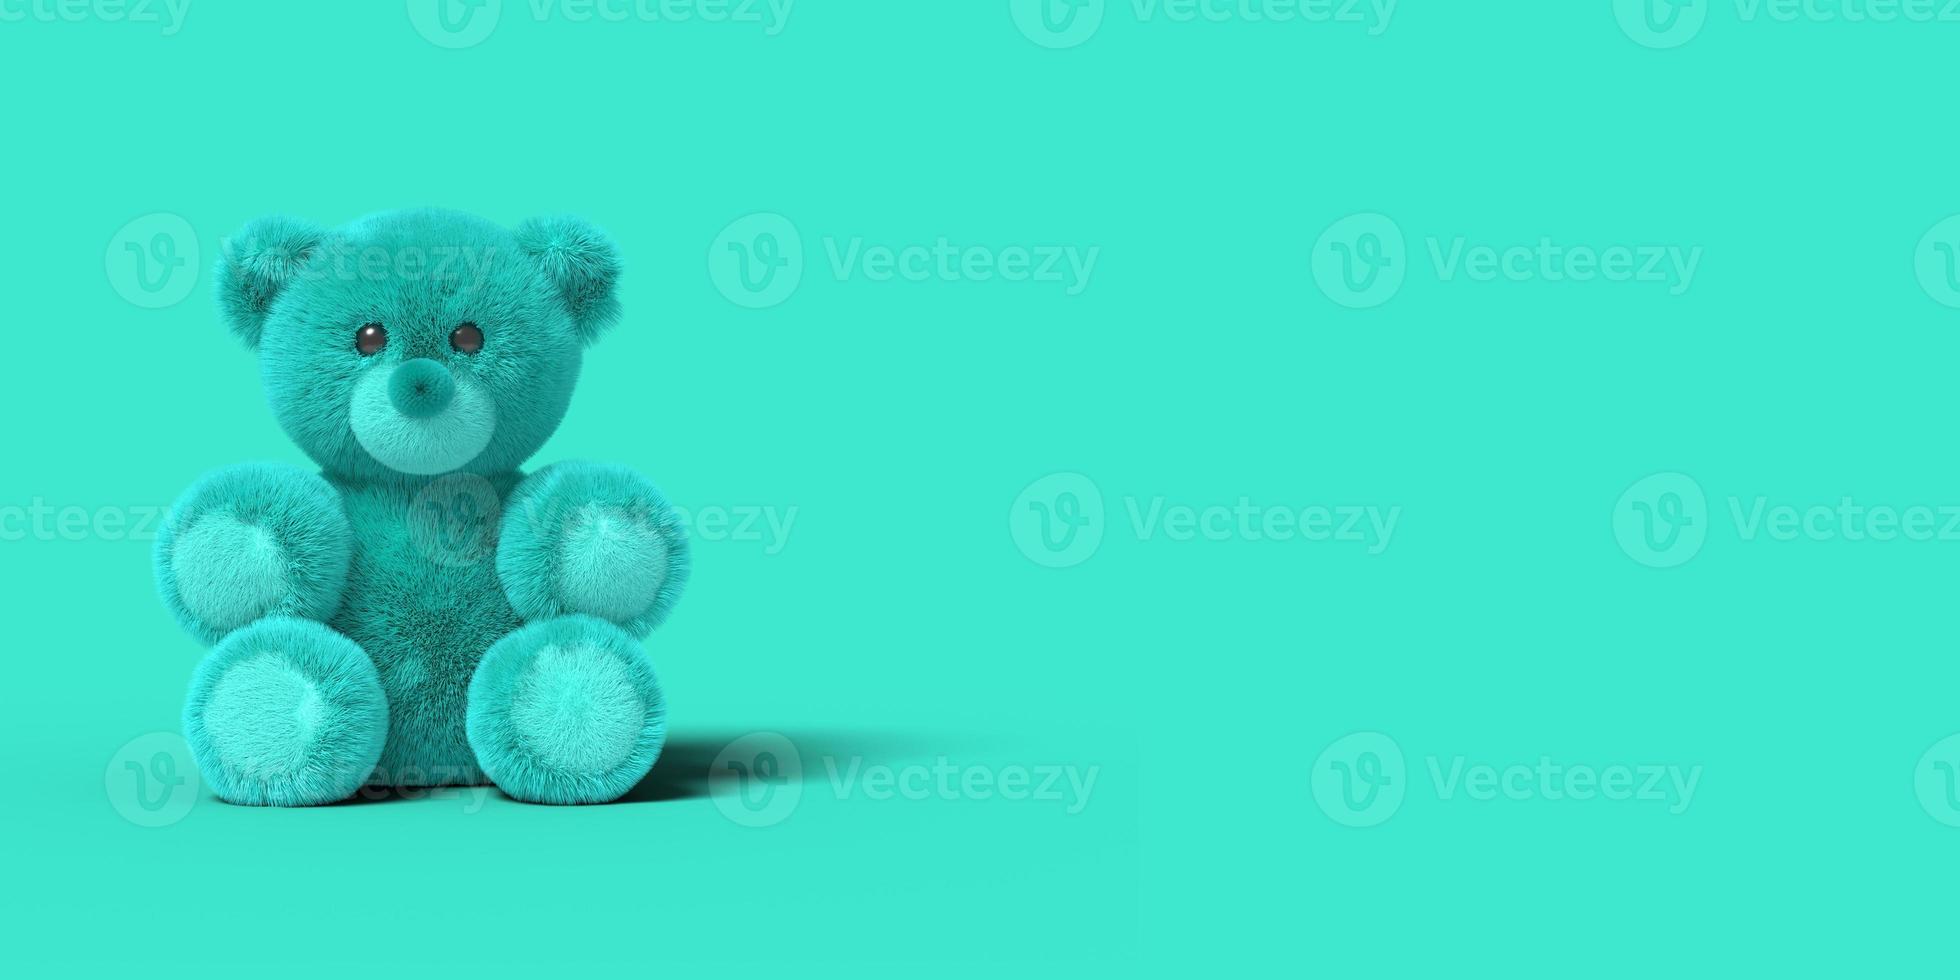 Blue toy bear is sitting on the floor on a blue background. Abstract image. Minimal concept toys business. 3D render. photo